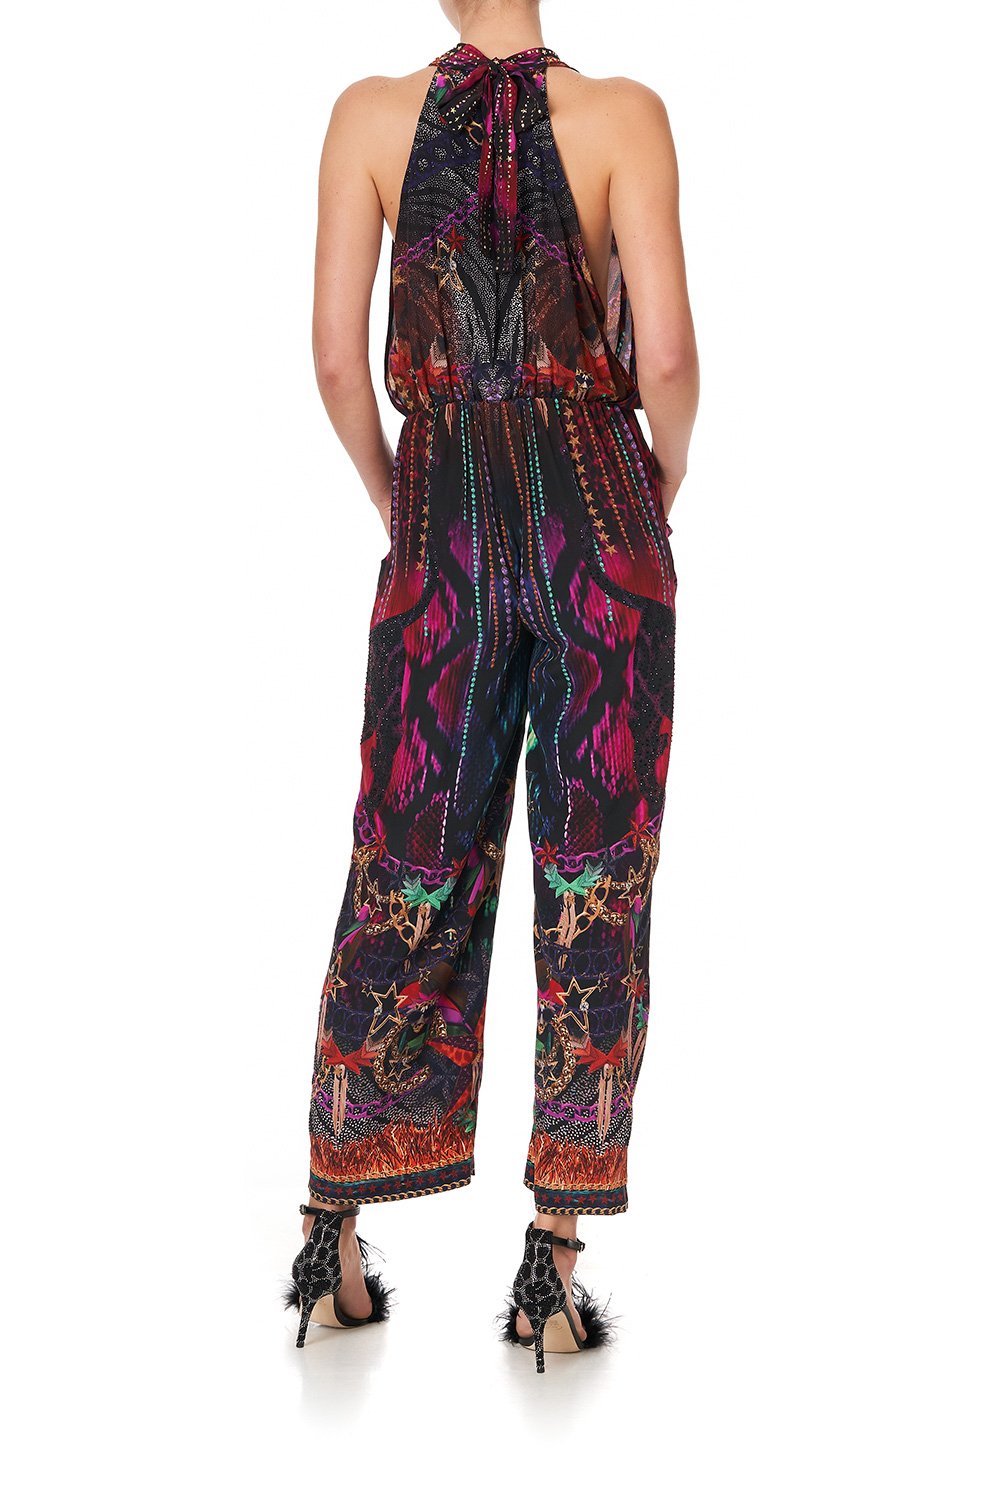 DRAPED FRONT BODICE JUMPSUIT WITH NECK TIE ROCKET WOMAN